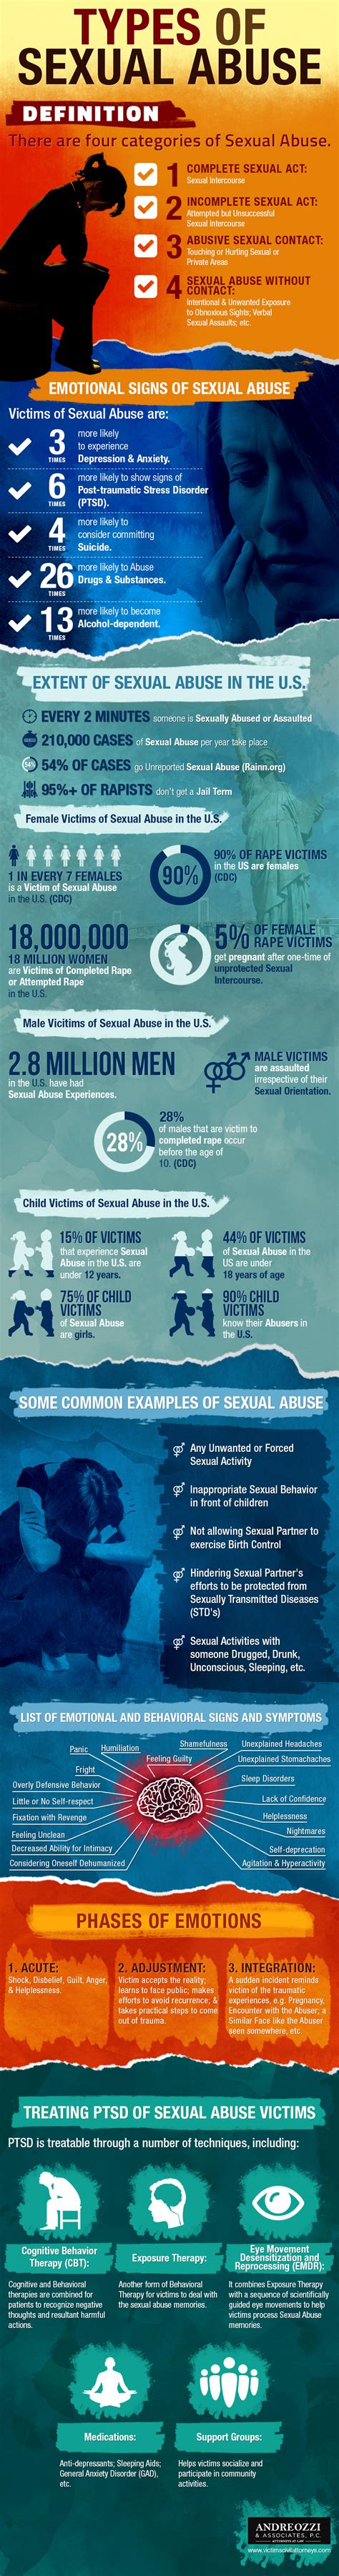 Types Of Sexual Abuse [infographic]